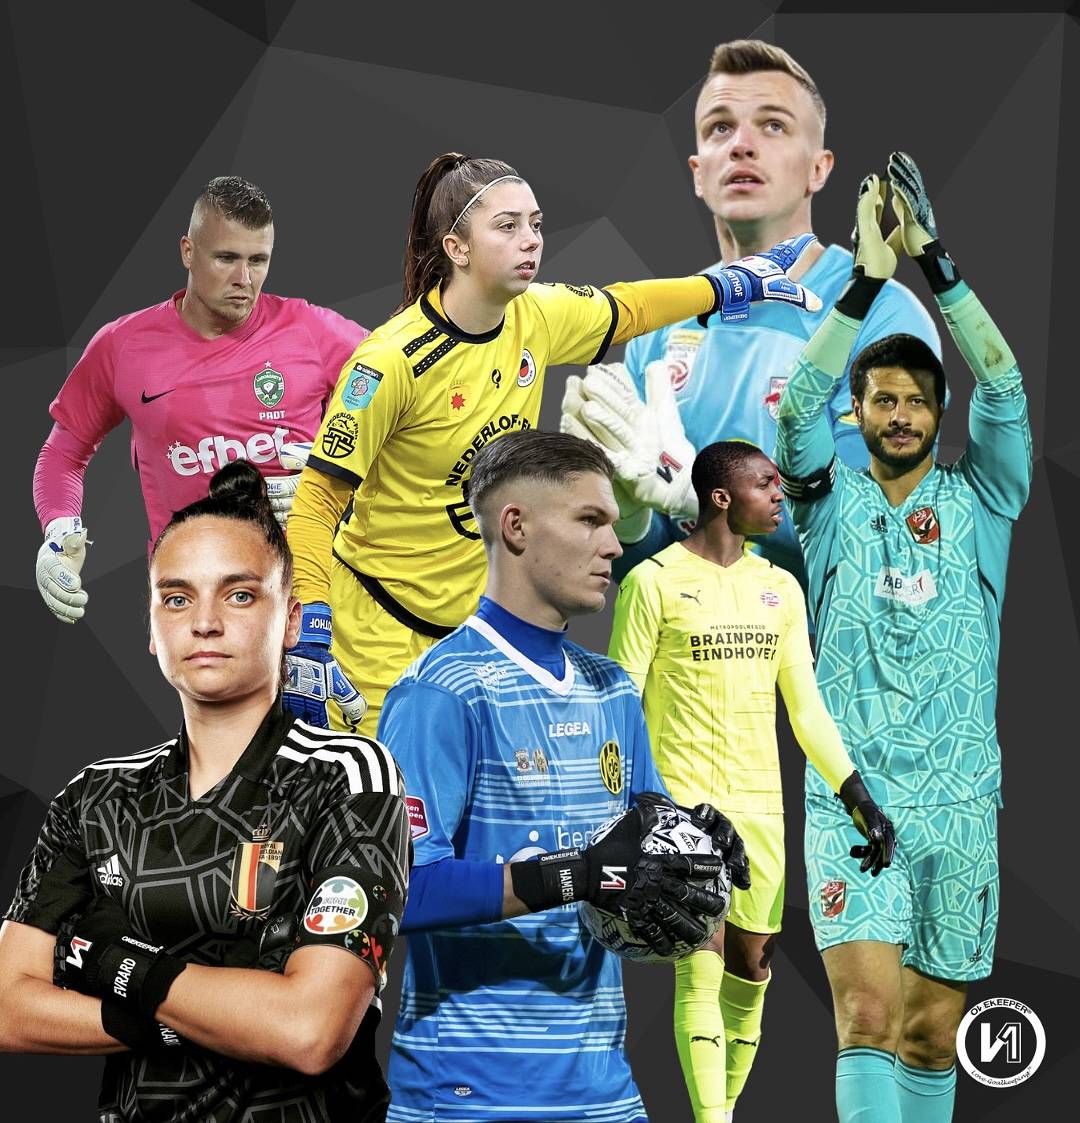 ONEKEEPER Goalkeepergloves and products - ONEKEEPER